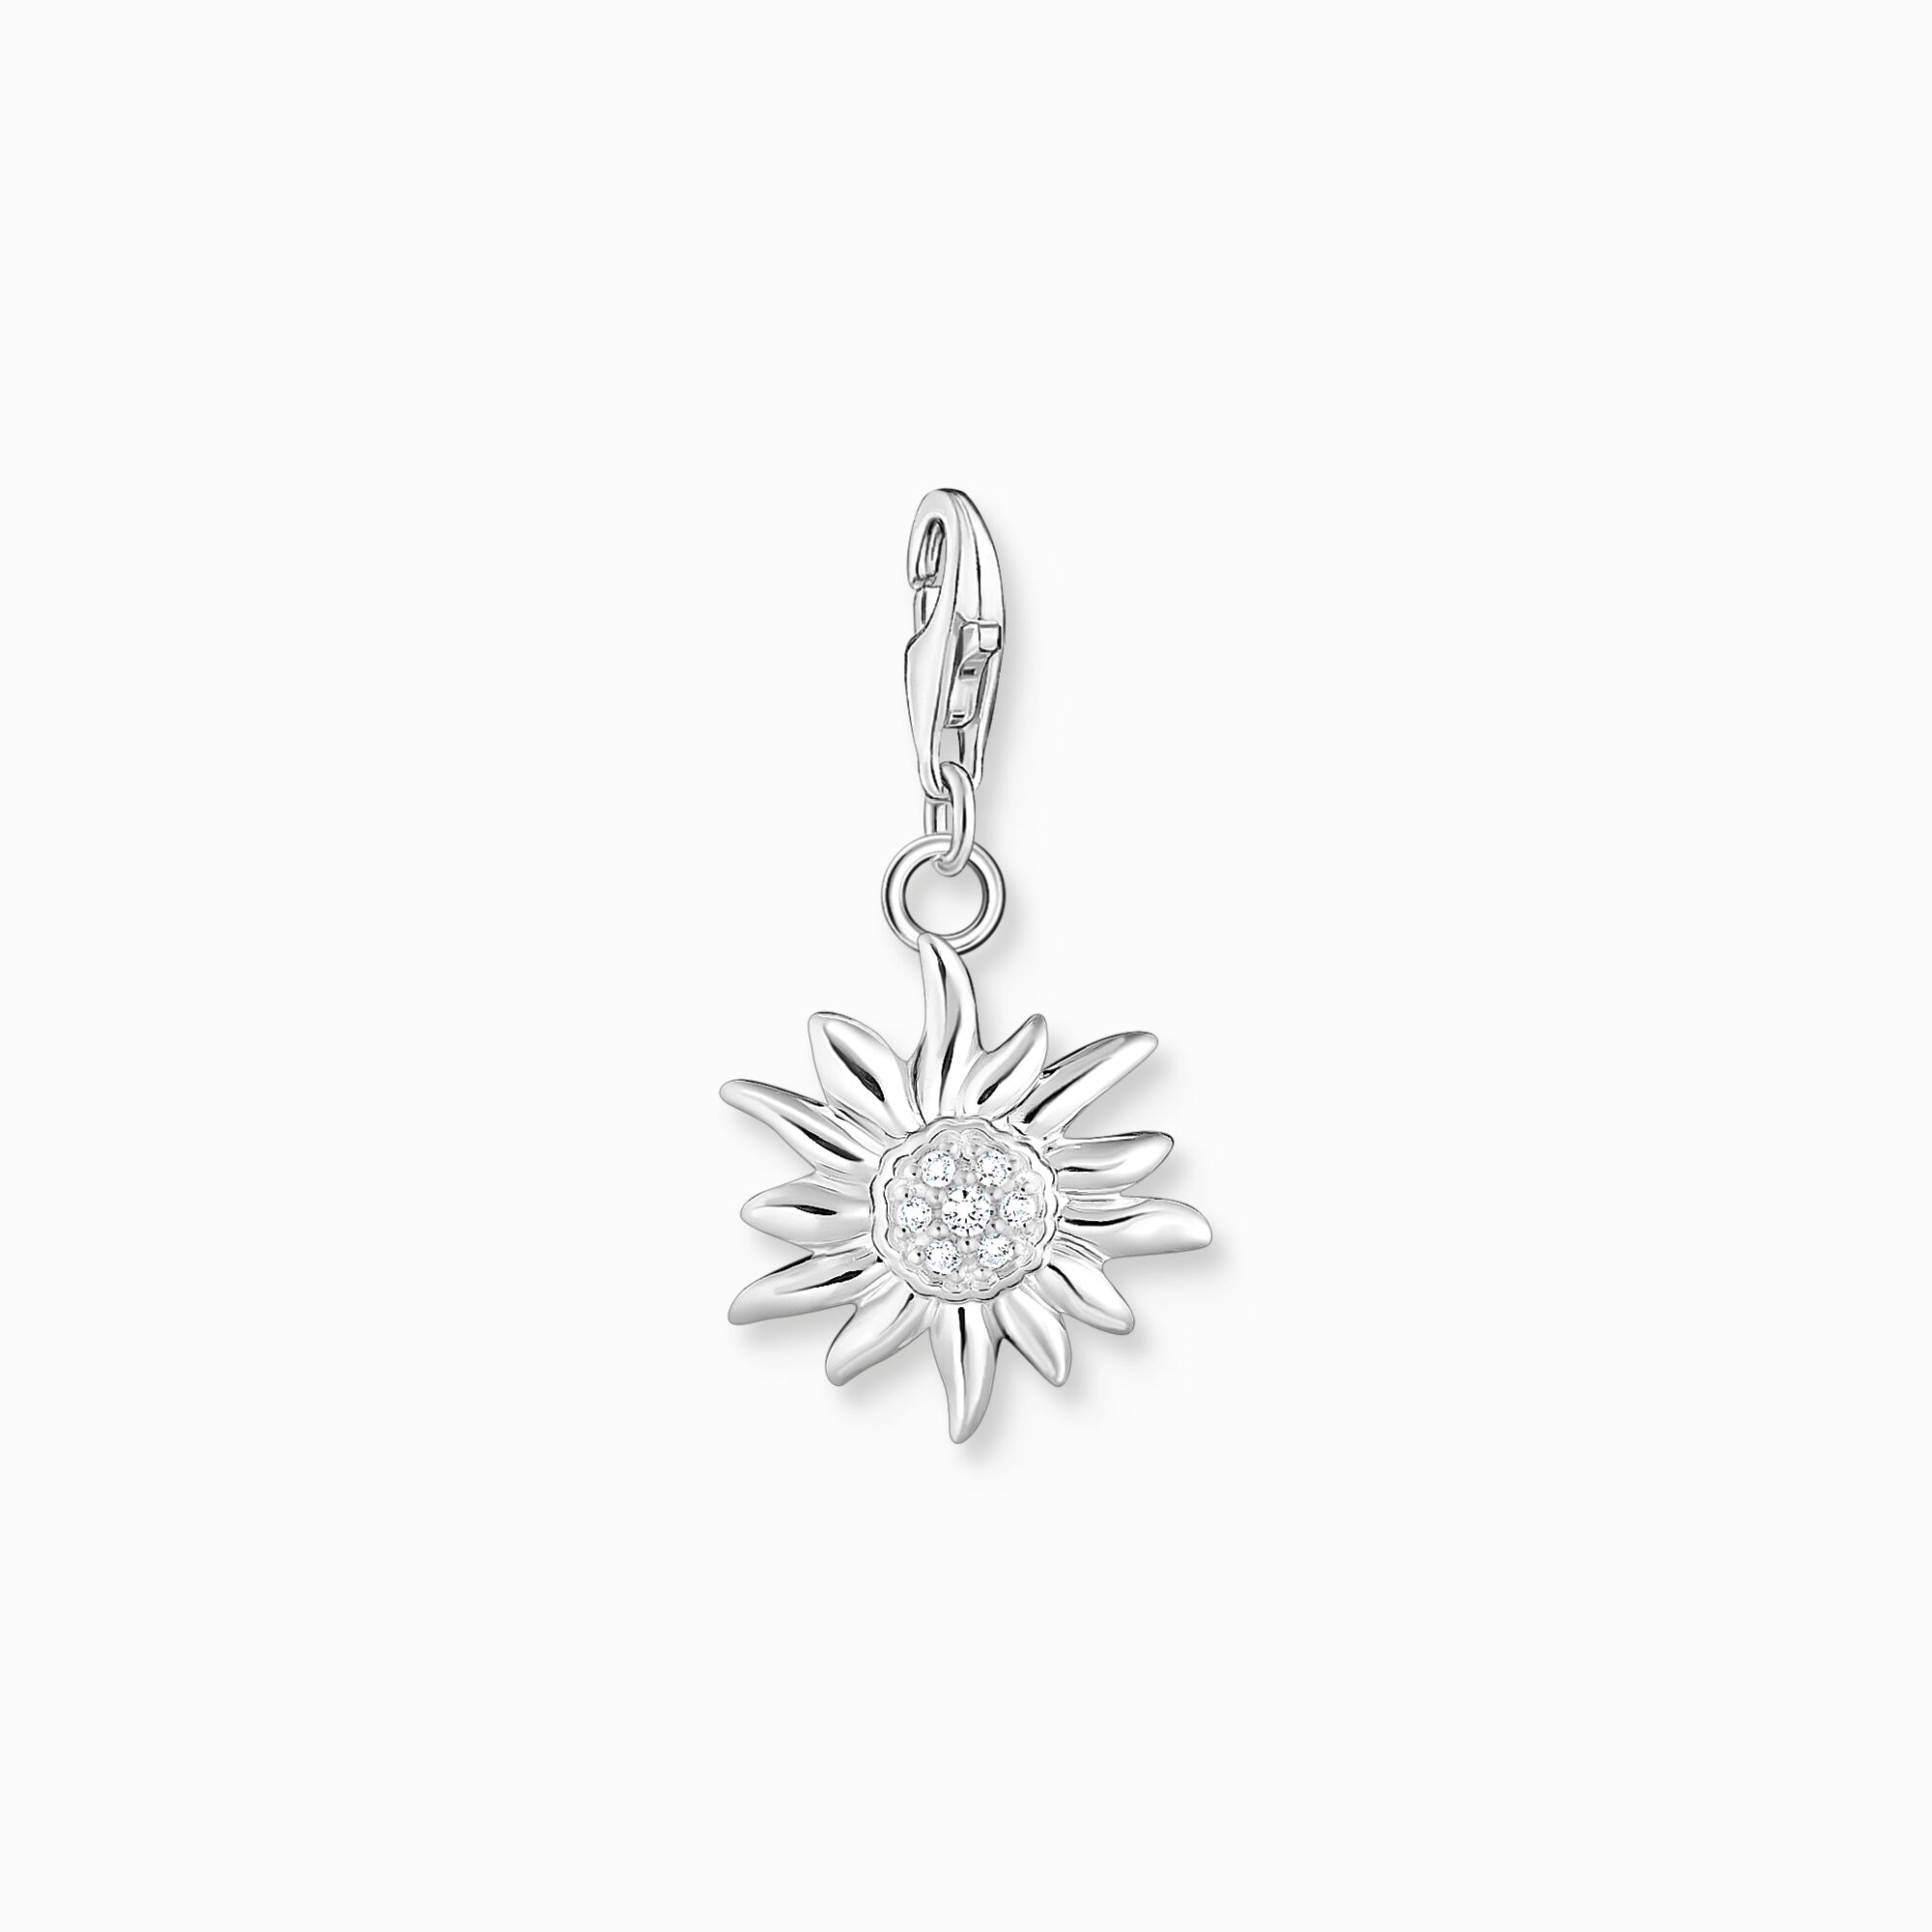 Charm pendant edelweiss flower with white stones silver from the Charm Club collection in the THOMAS SABO online store